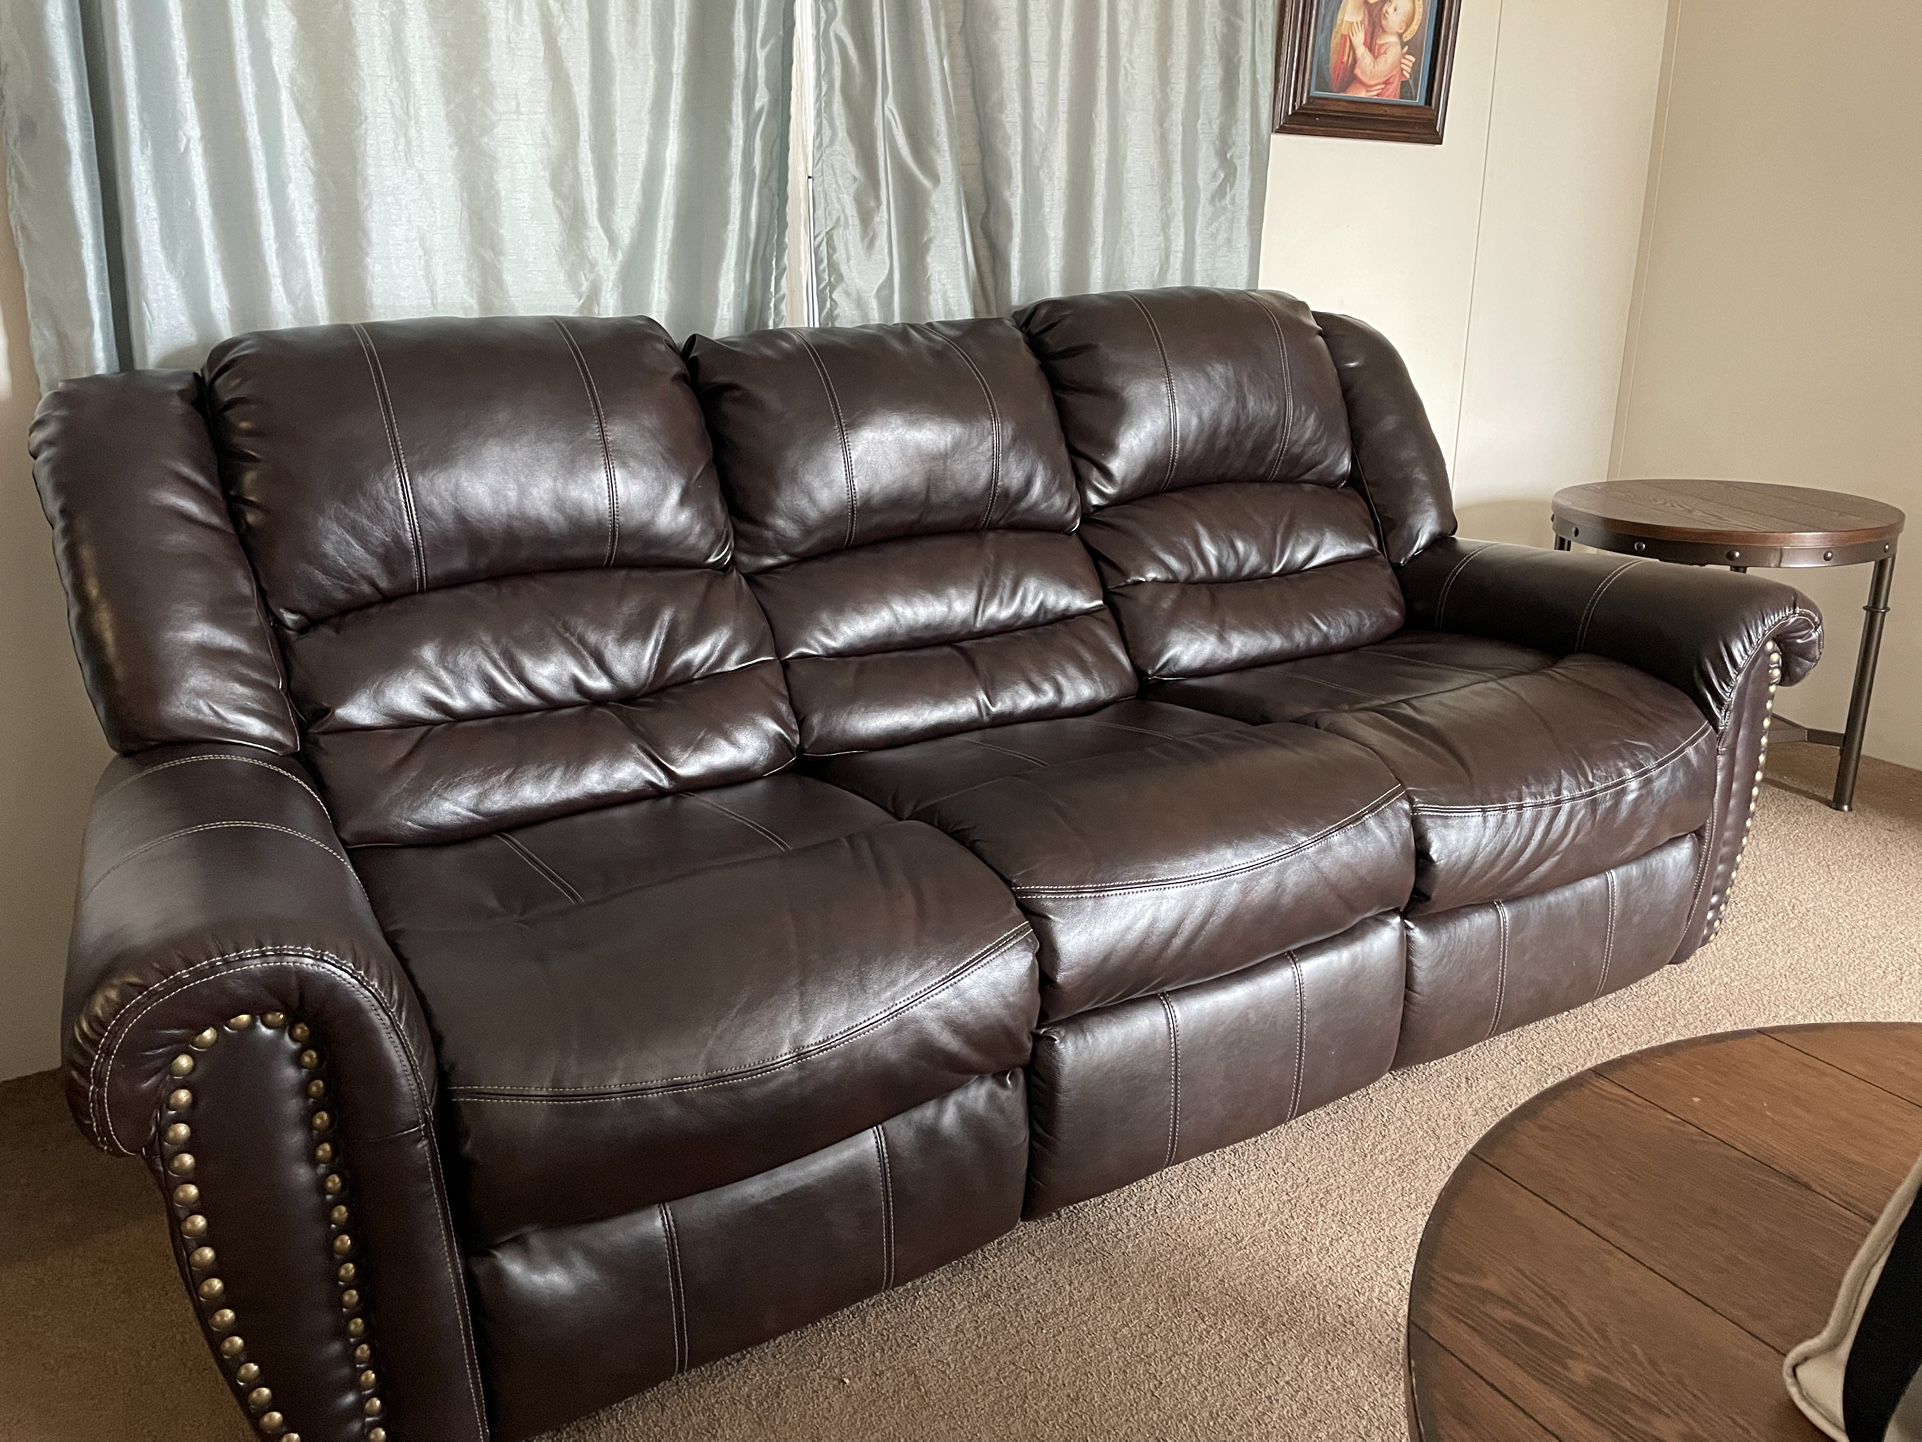 Comfy Couches. Reclines On 4 Corners.   $1,400